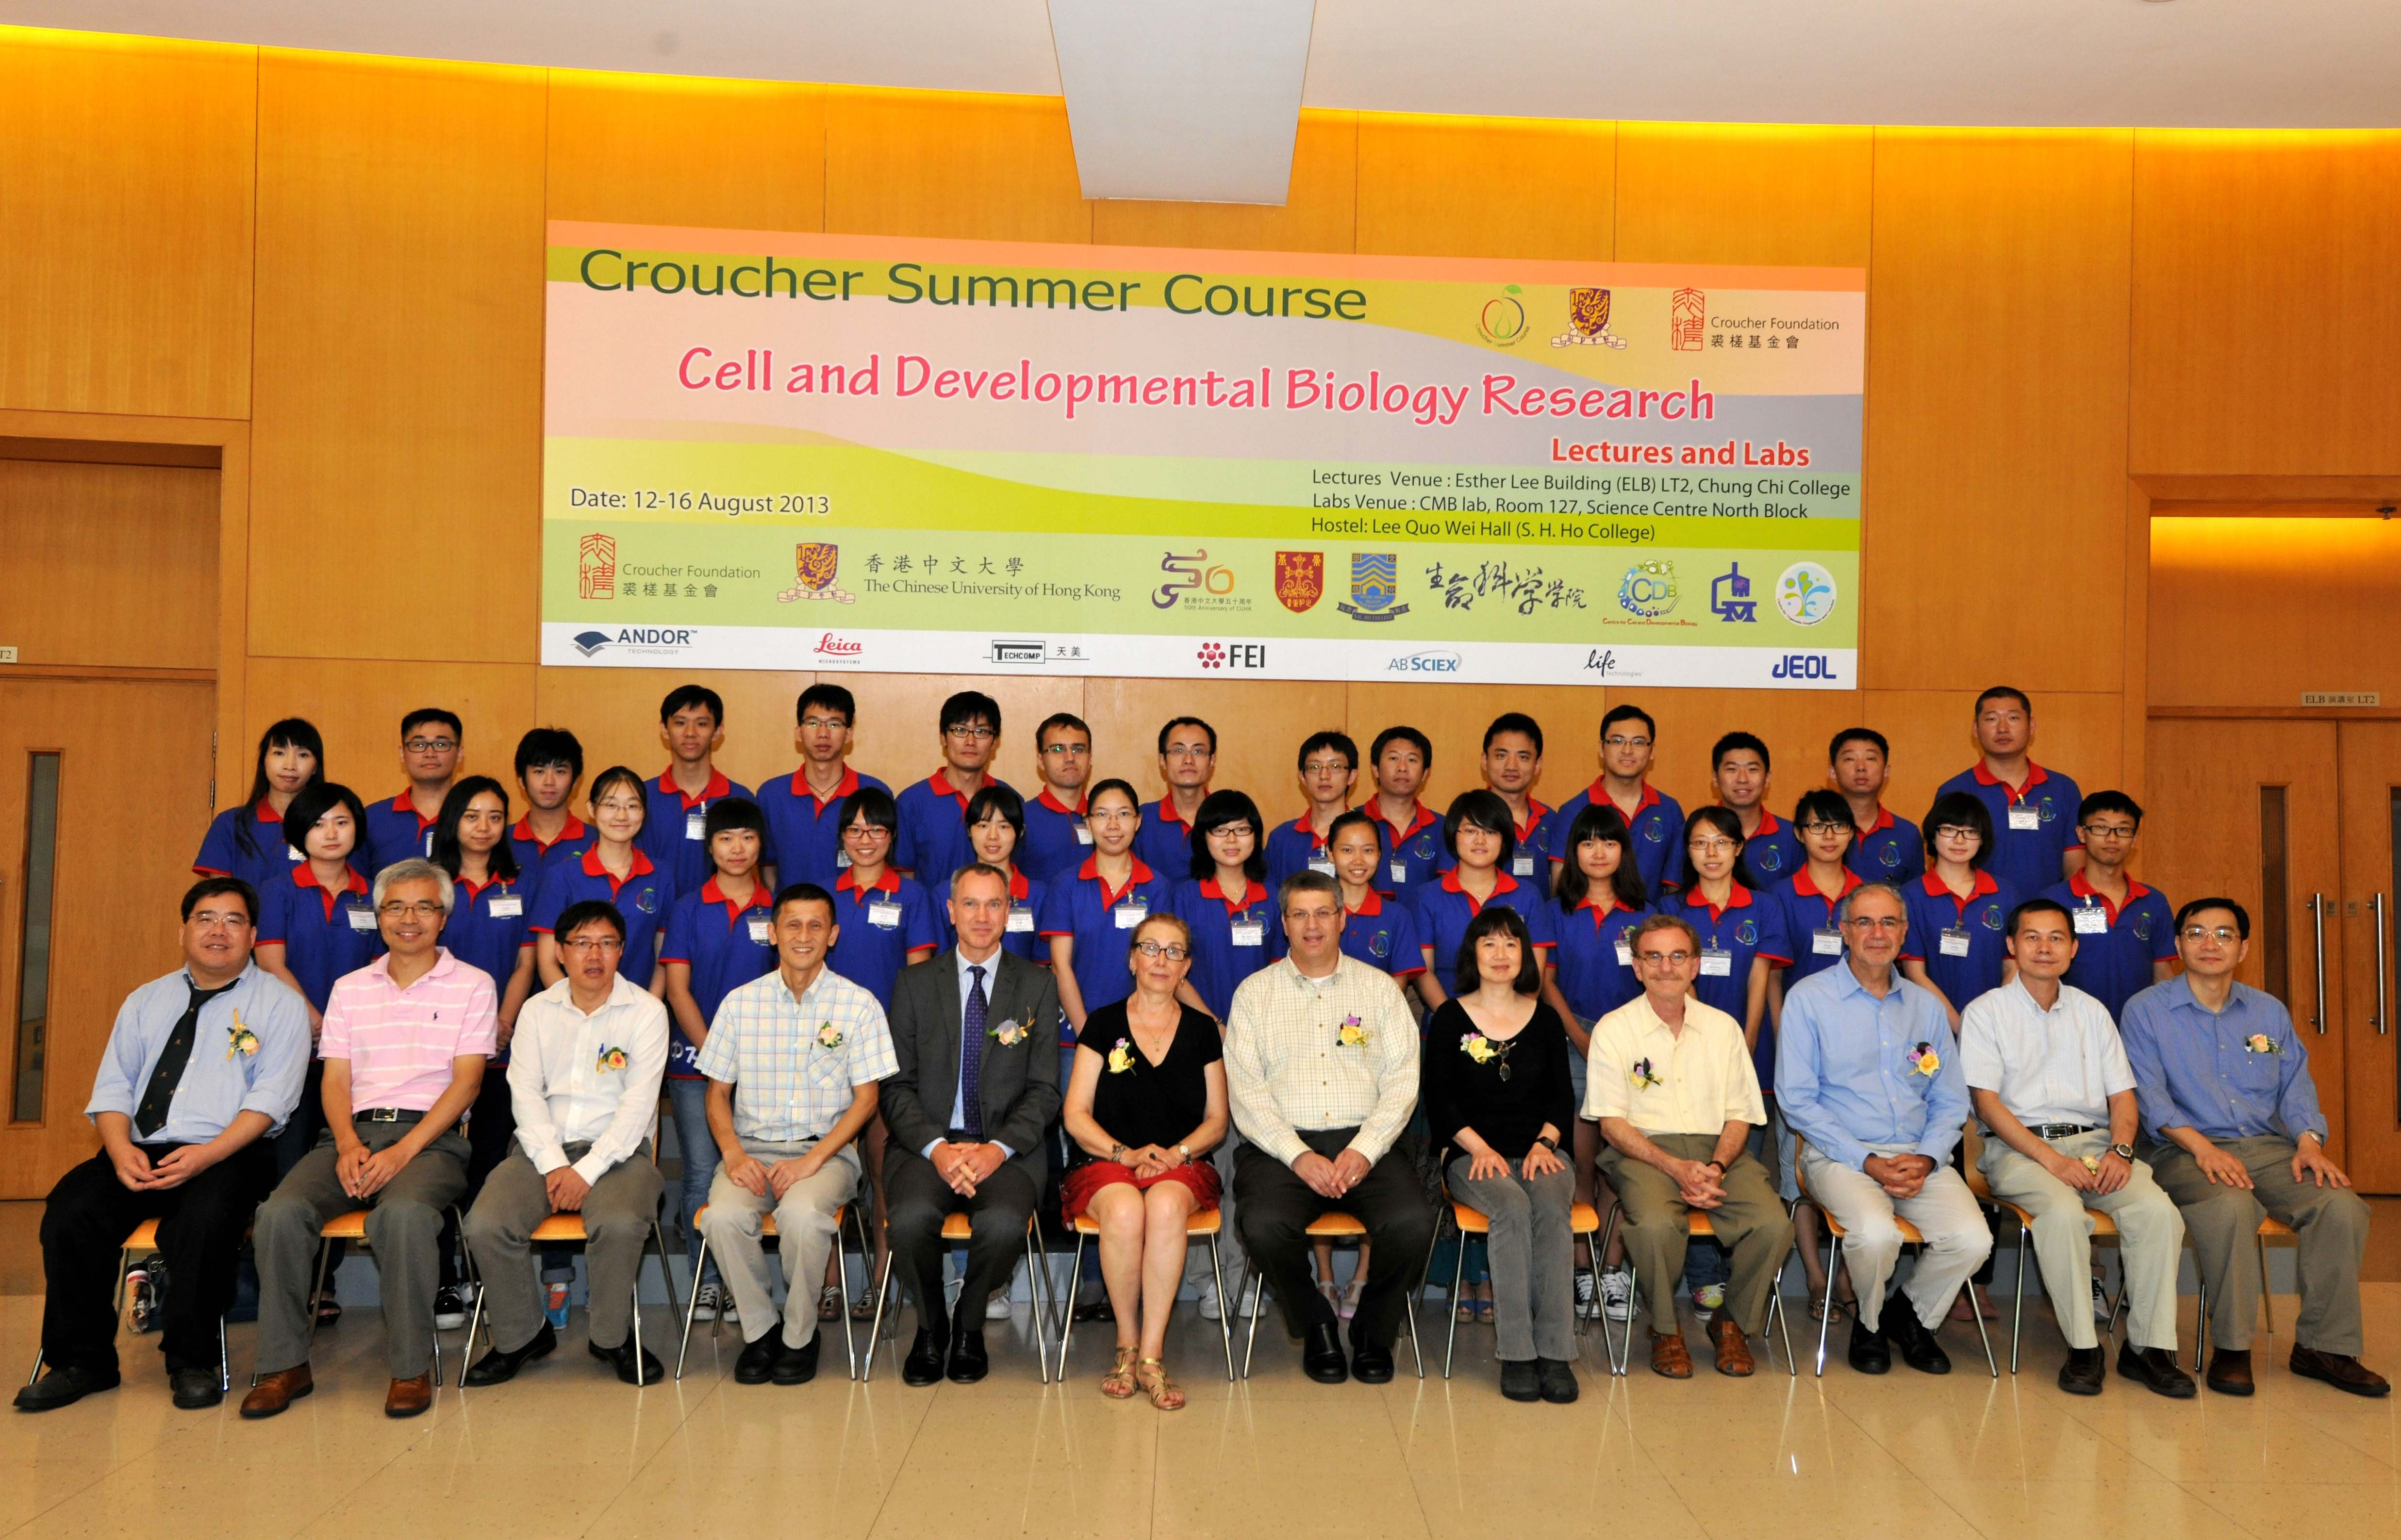 Croucher Summer Course 2013 Group Photo